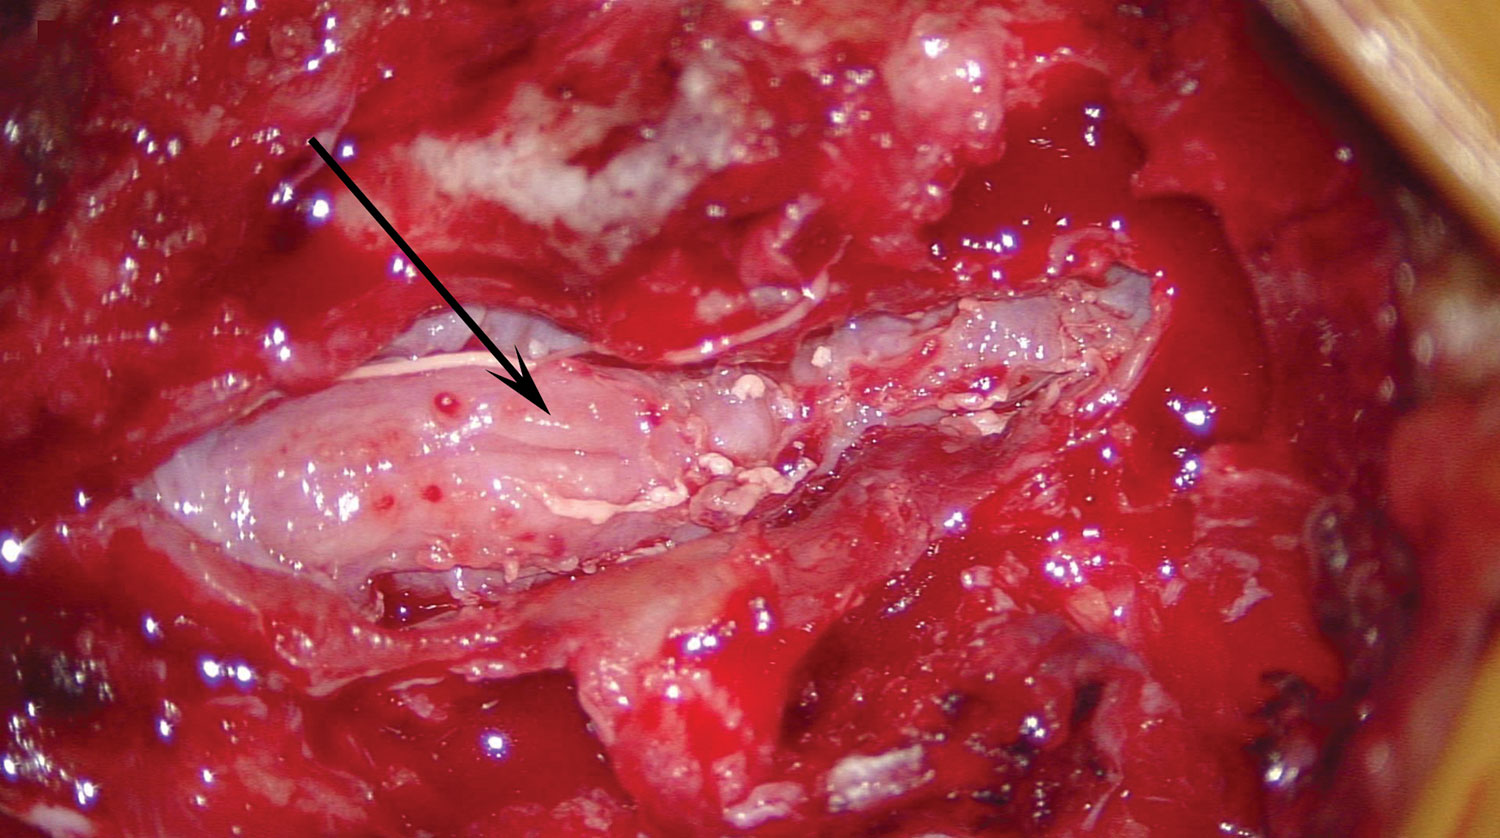 Intraoperative image demonstrating postevacuation cauda equina nerve roots that are grossly edematous and adherent (arrow), consistent with arachnoiditis, in a patient with recurrent infection from fungal-contaminated methylprednisolone, North Carolina, USA, 2015.